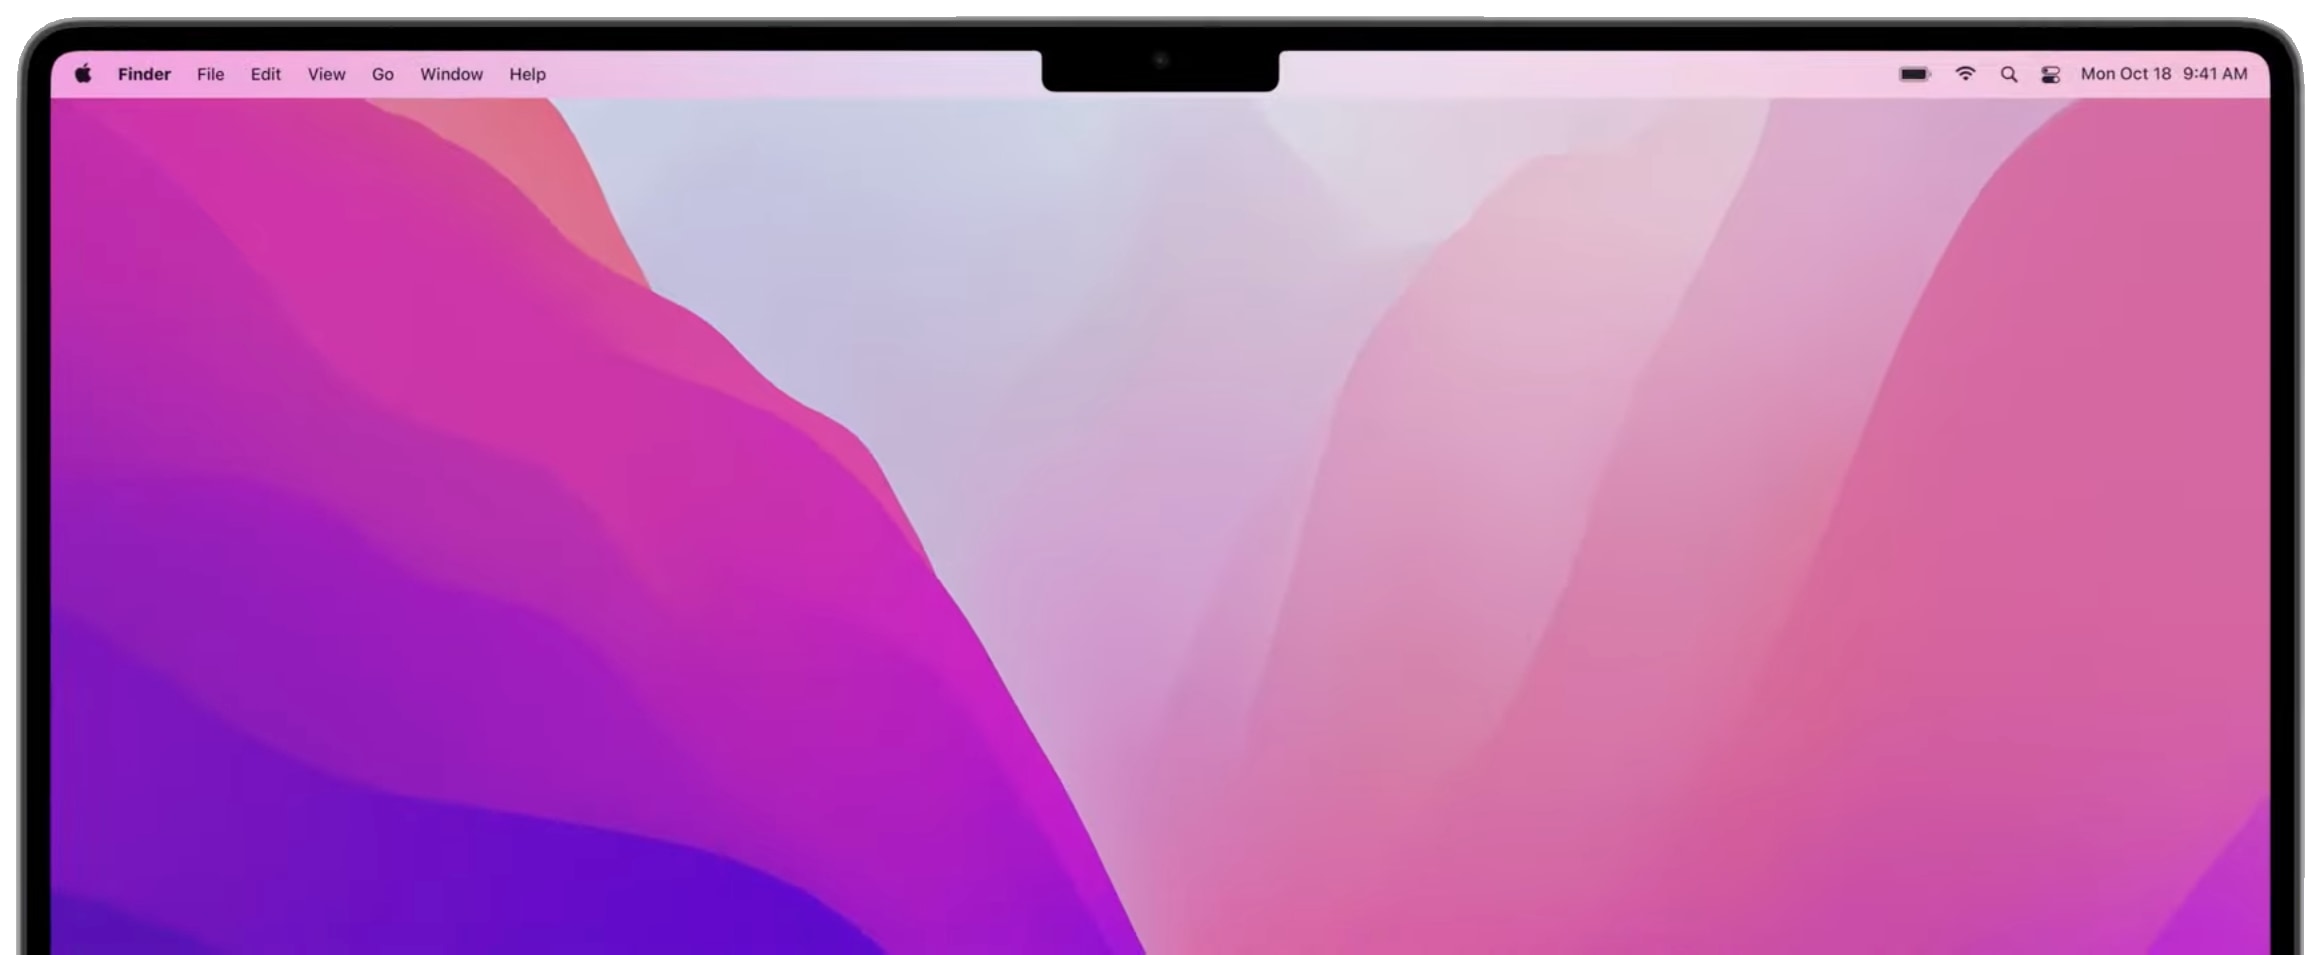 Apple's marketing image showing the notch along with the menu bar on the redesigned MacBook Pro from the year 2021